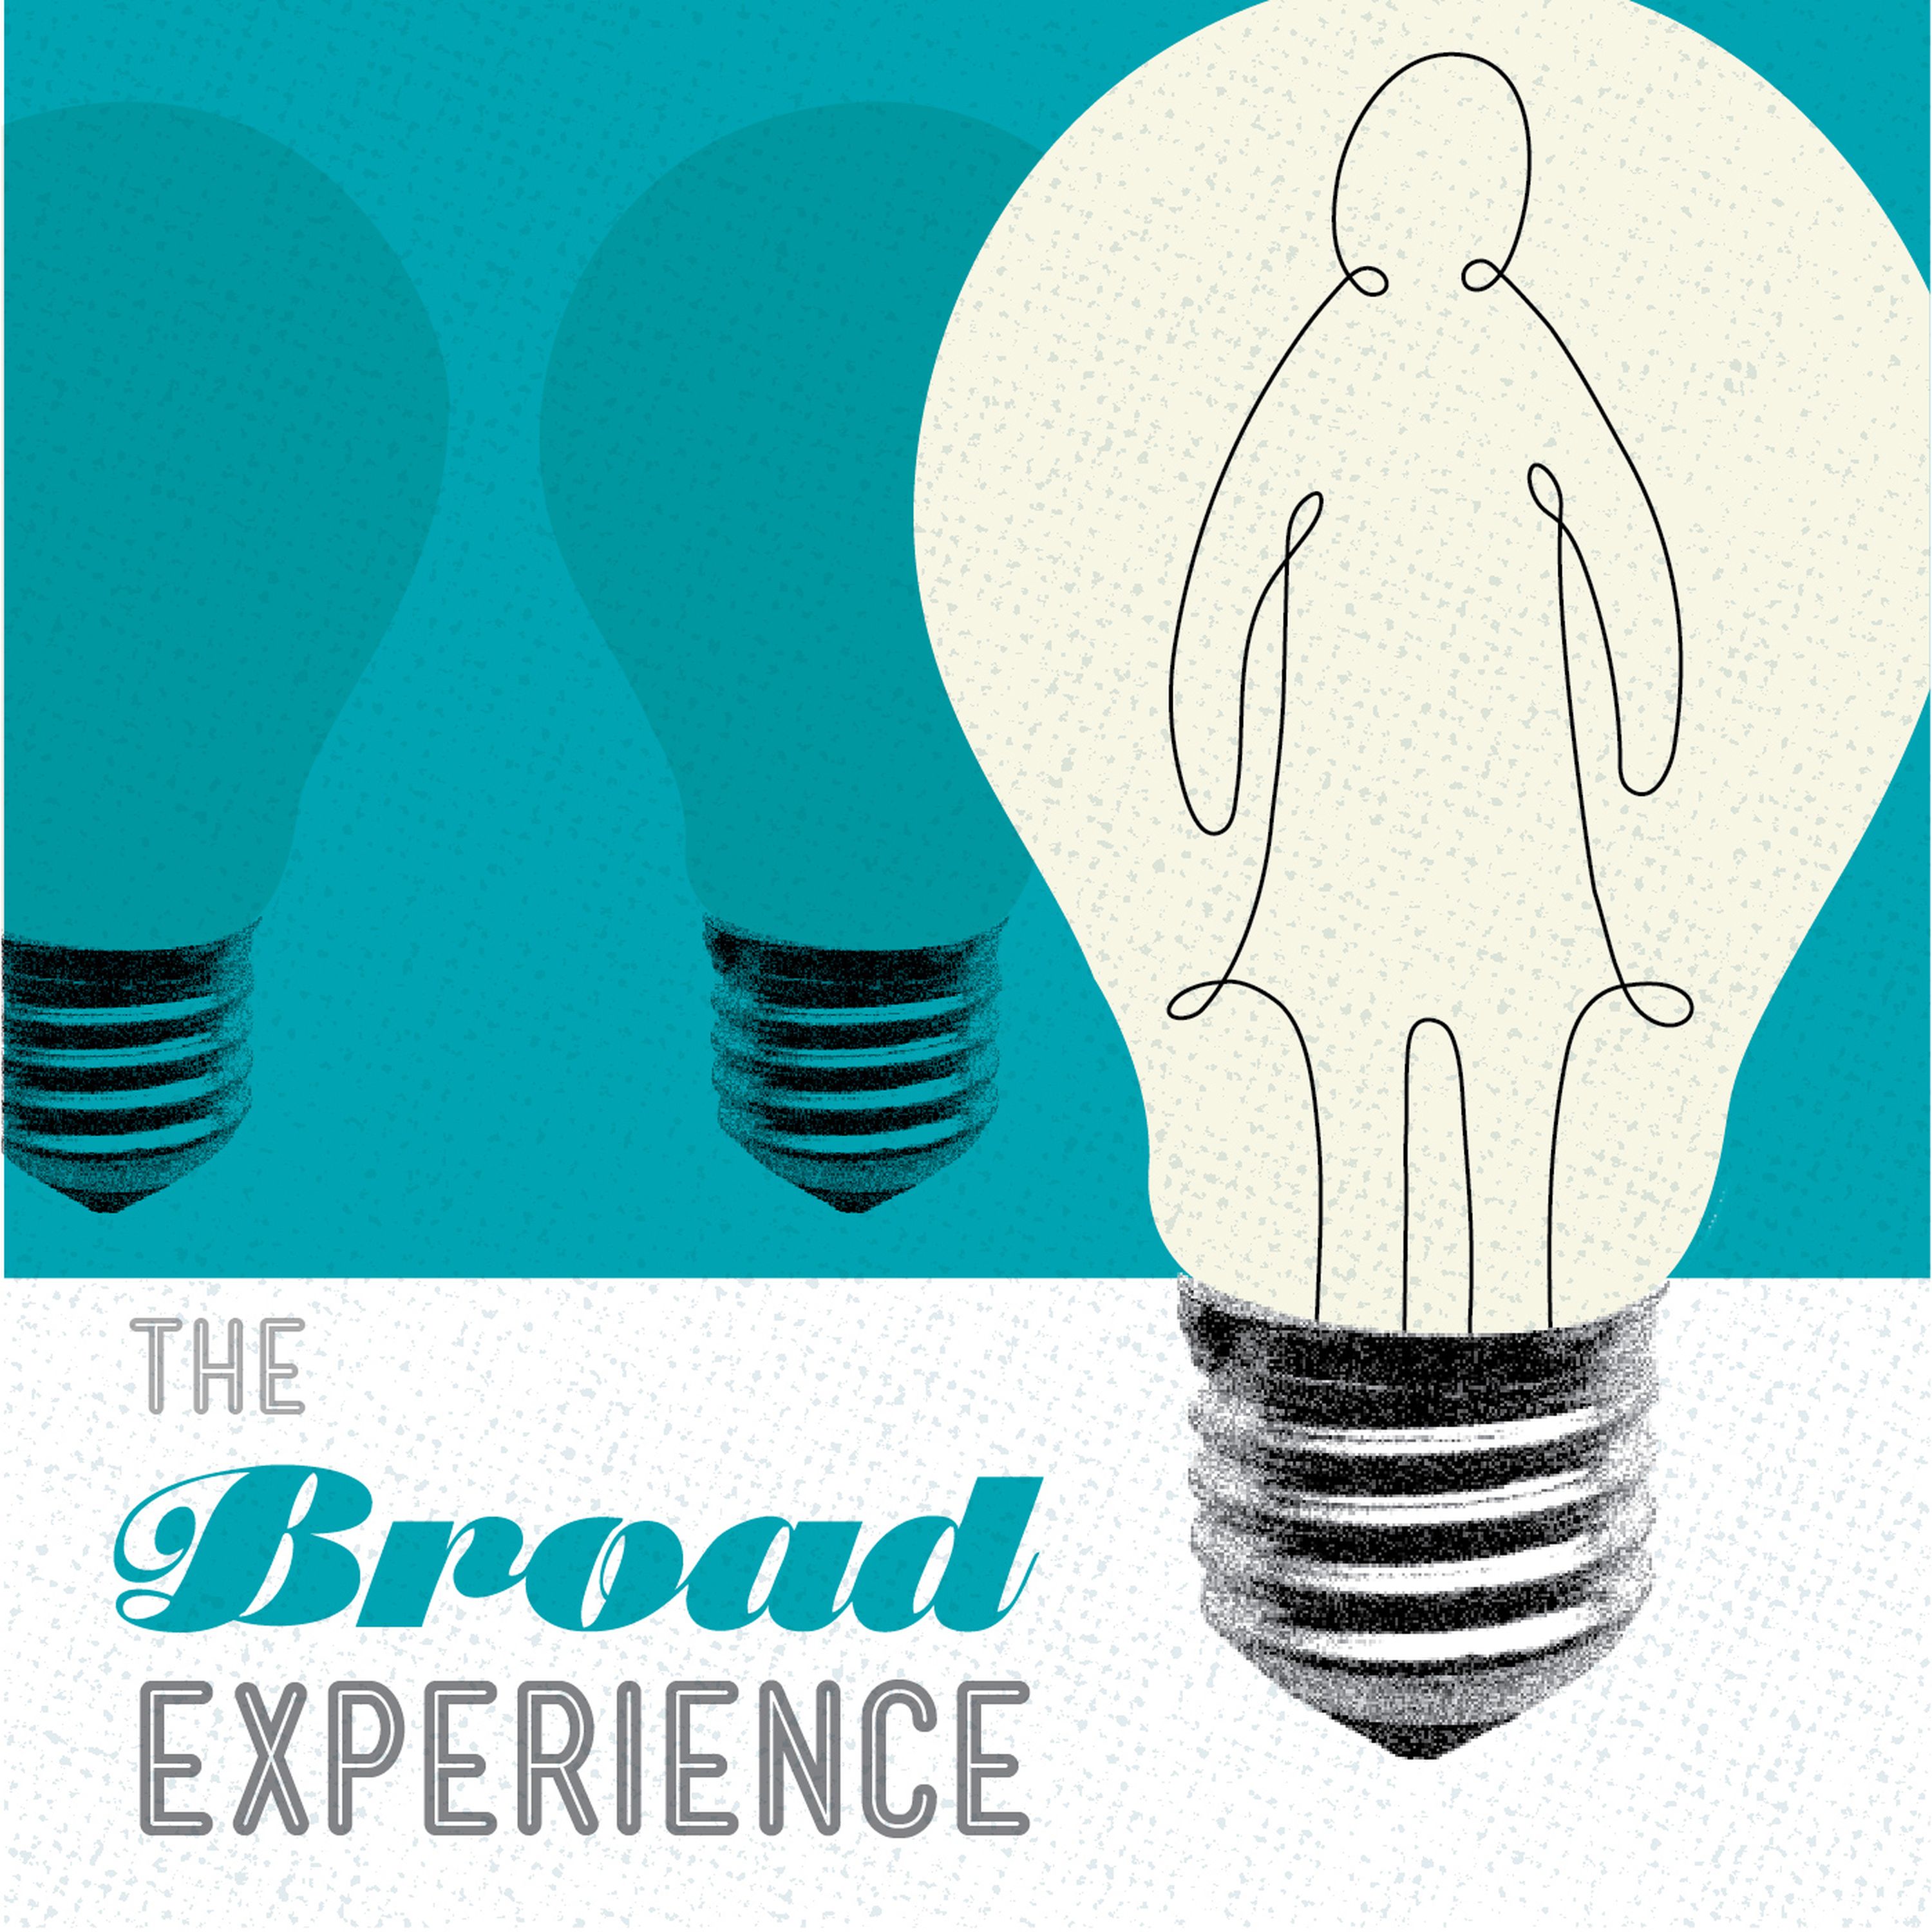 The Broad Experience 33: What is success?